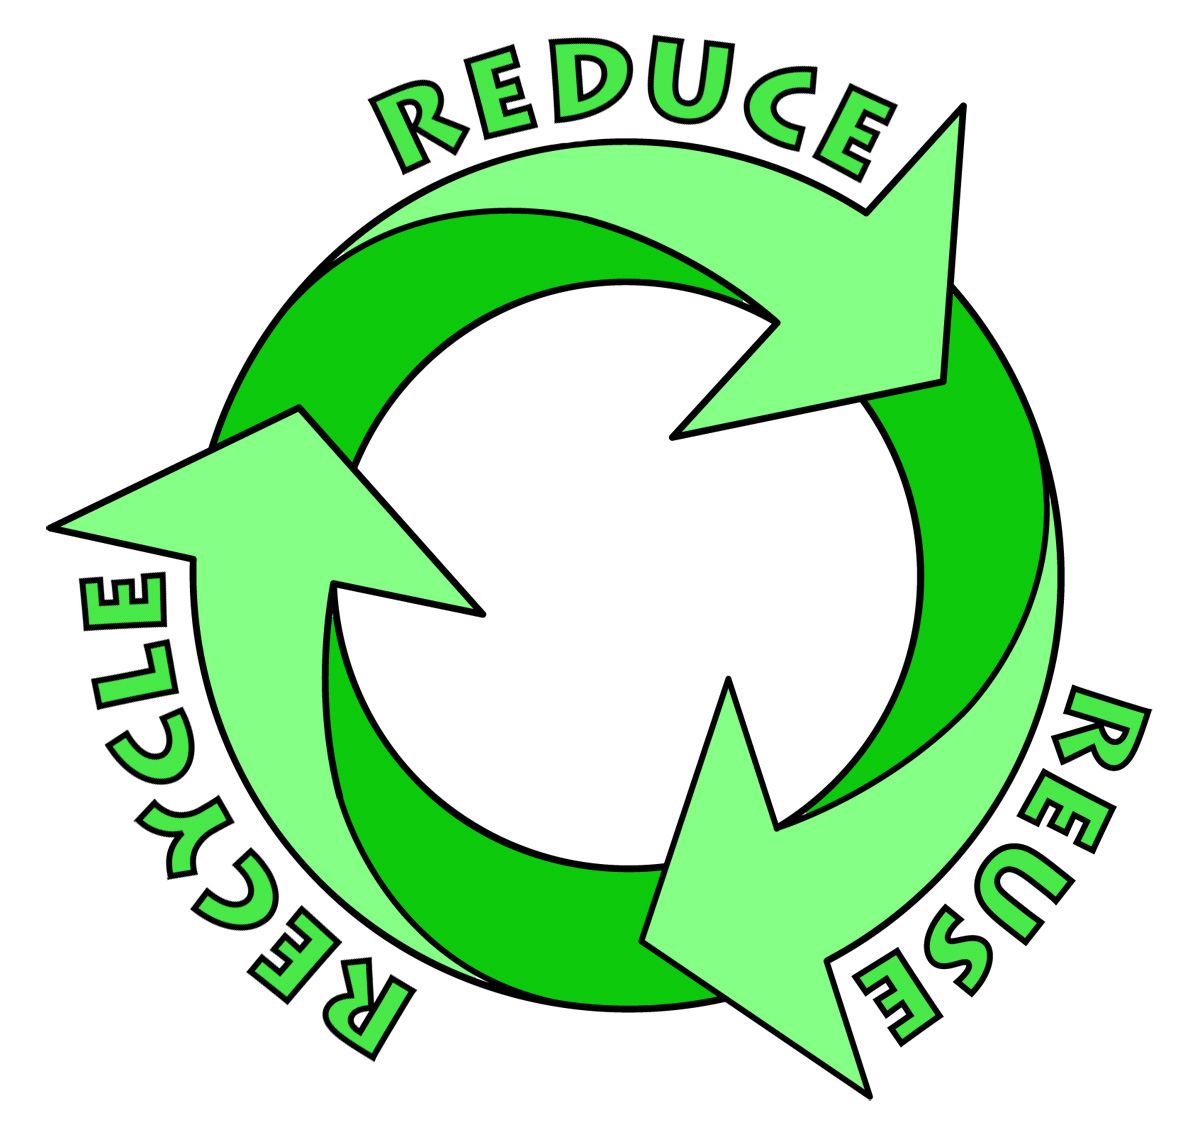 Recycle recycling clip art pictures free clipart images 2